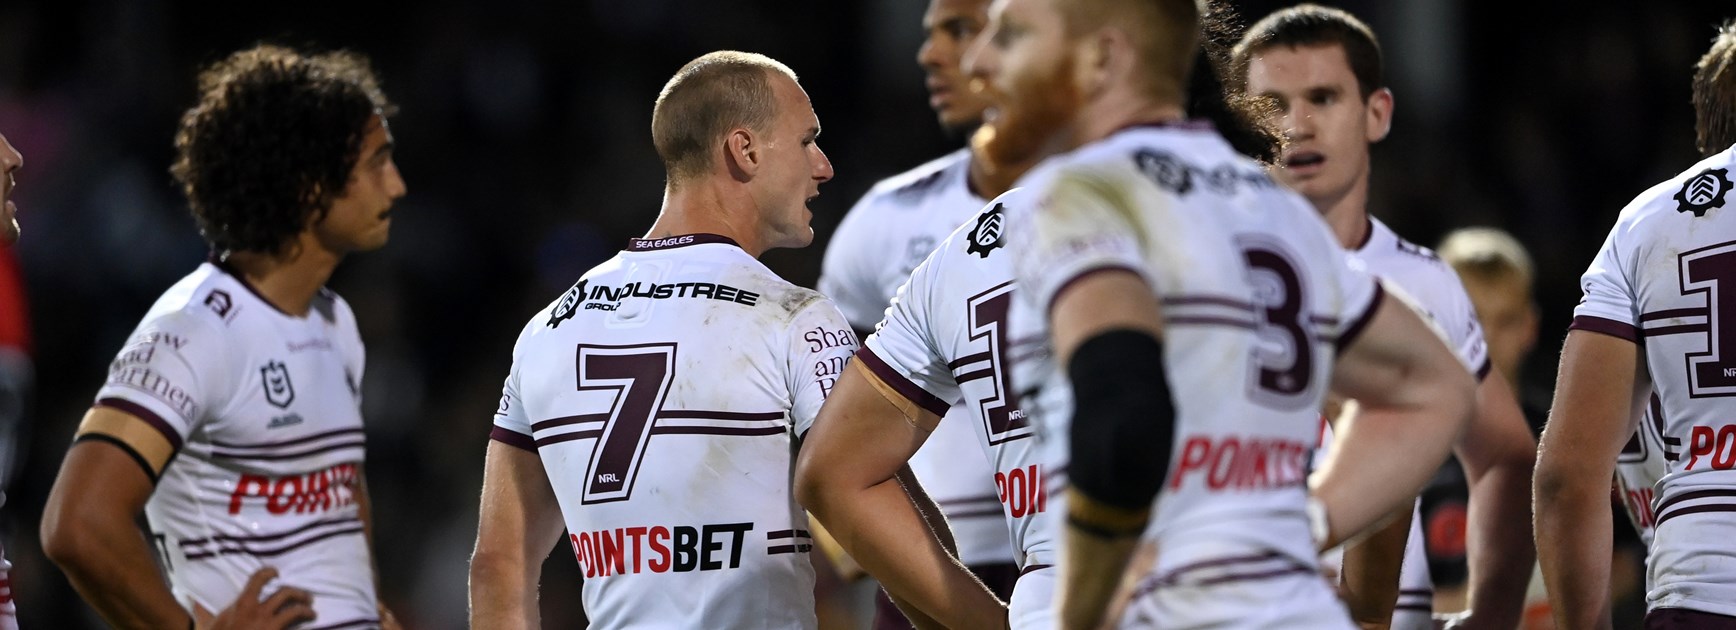 Sea Eagles suffer heavy loss to Panthers